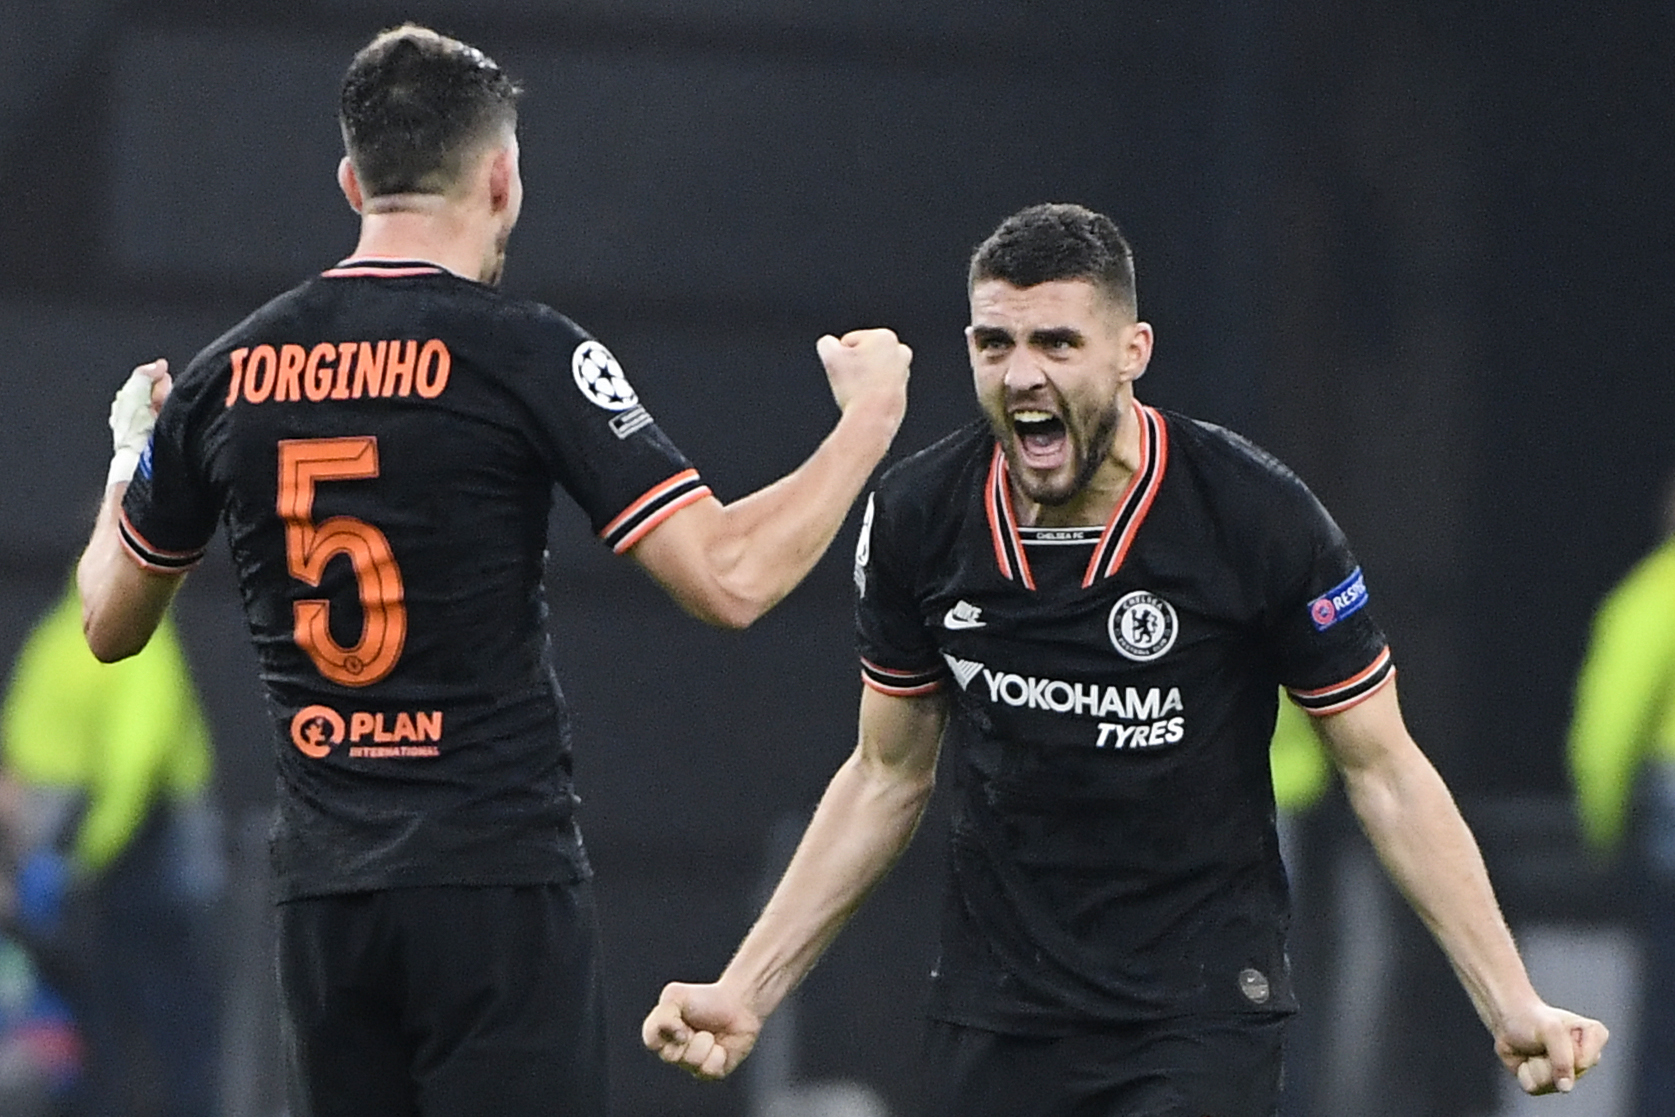 Jorginho and Mateo Kovacic are unavailable for Chelsea (Photo by John Thys/AFP via Getty Images)